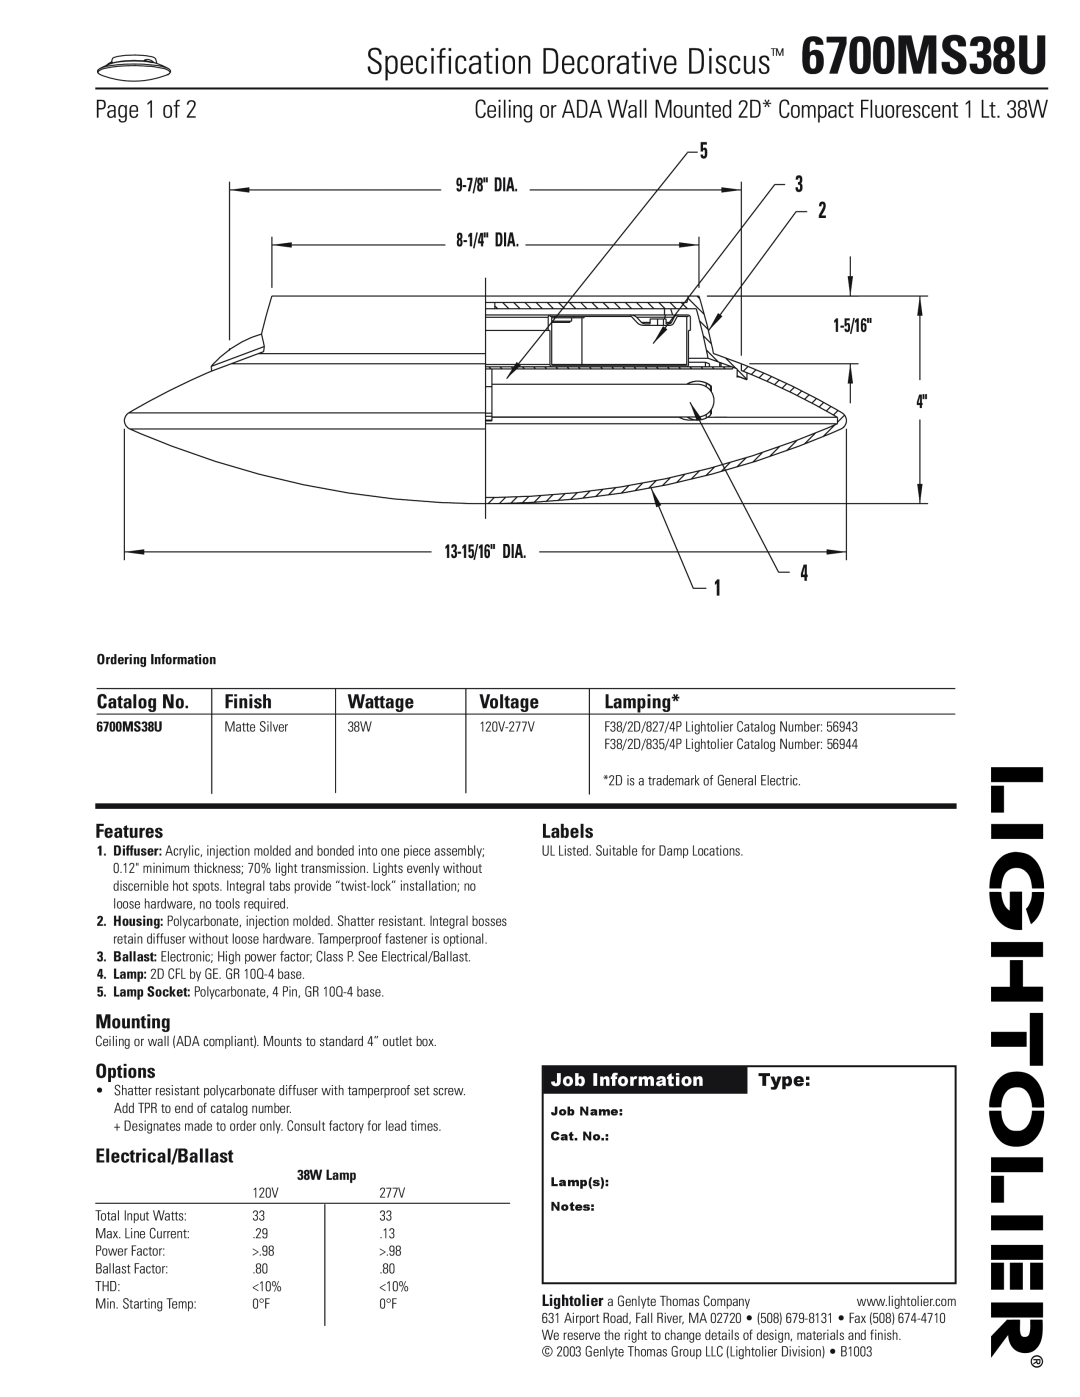 Lightolier manual Specification Decorative Discus 6700MS38U, Page 1 of 